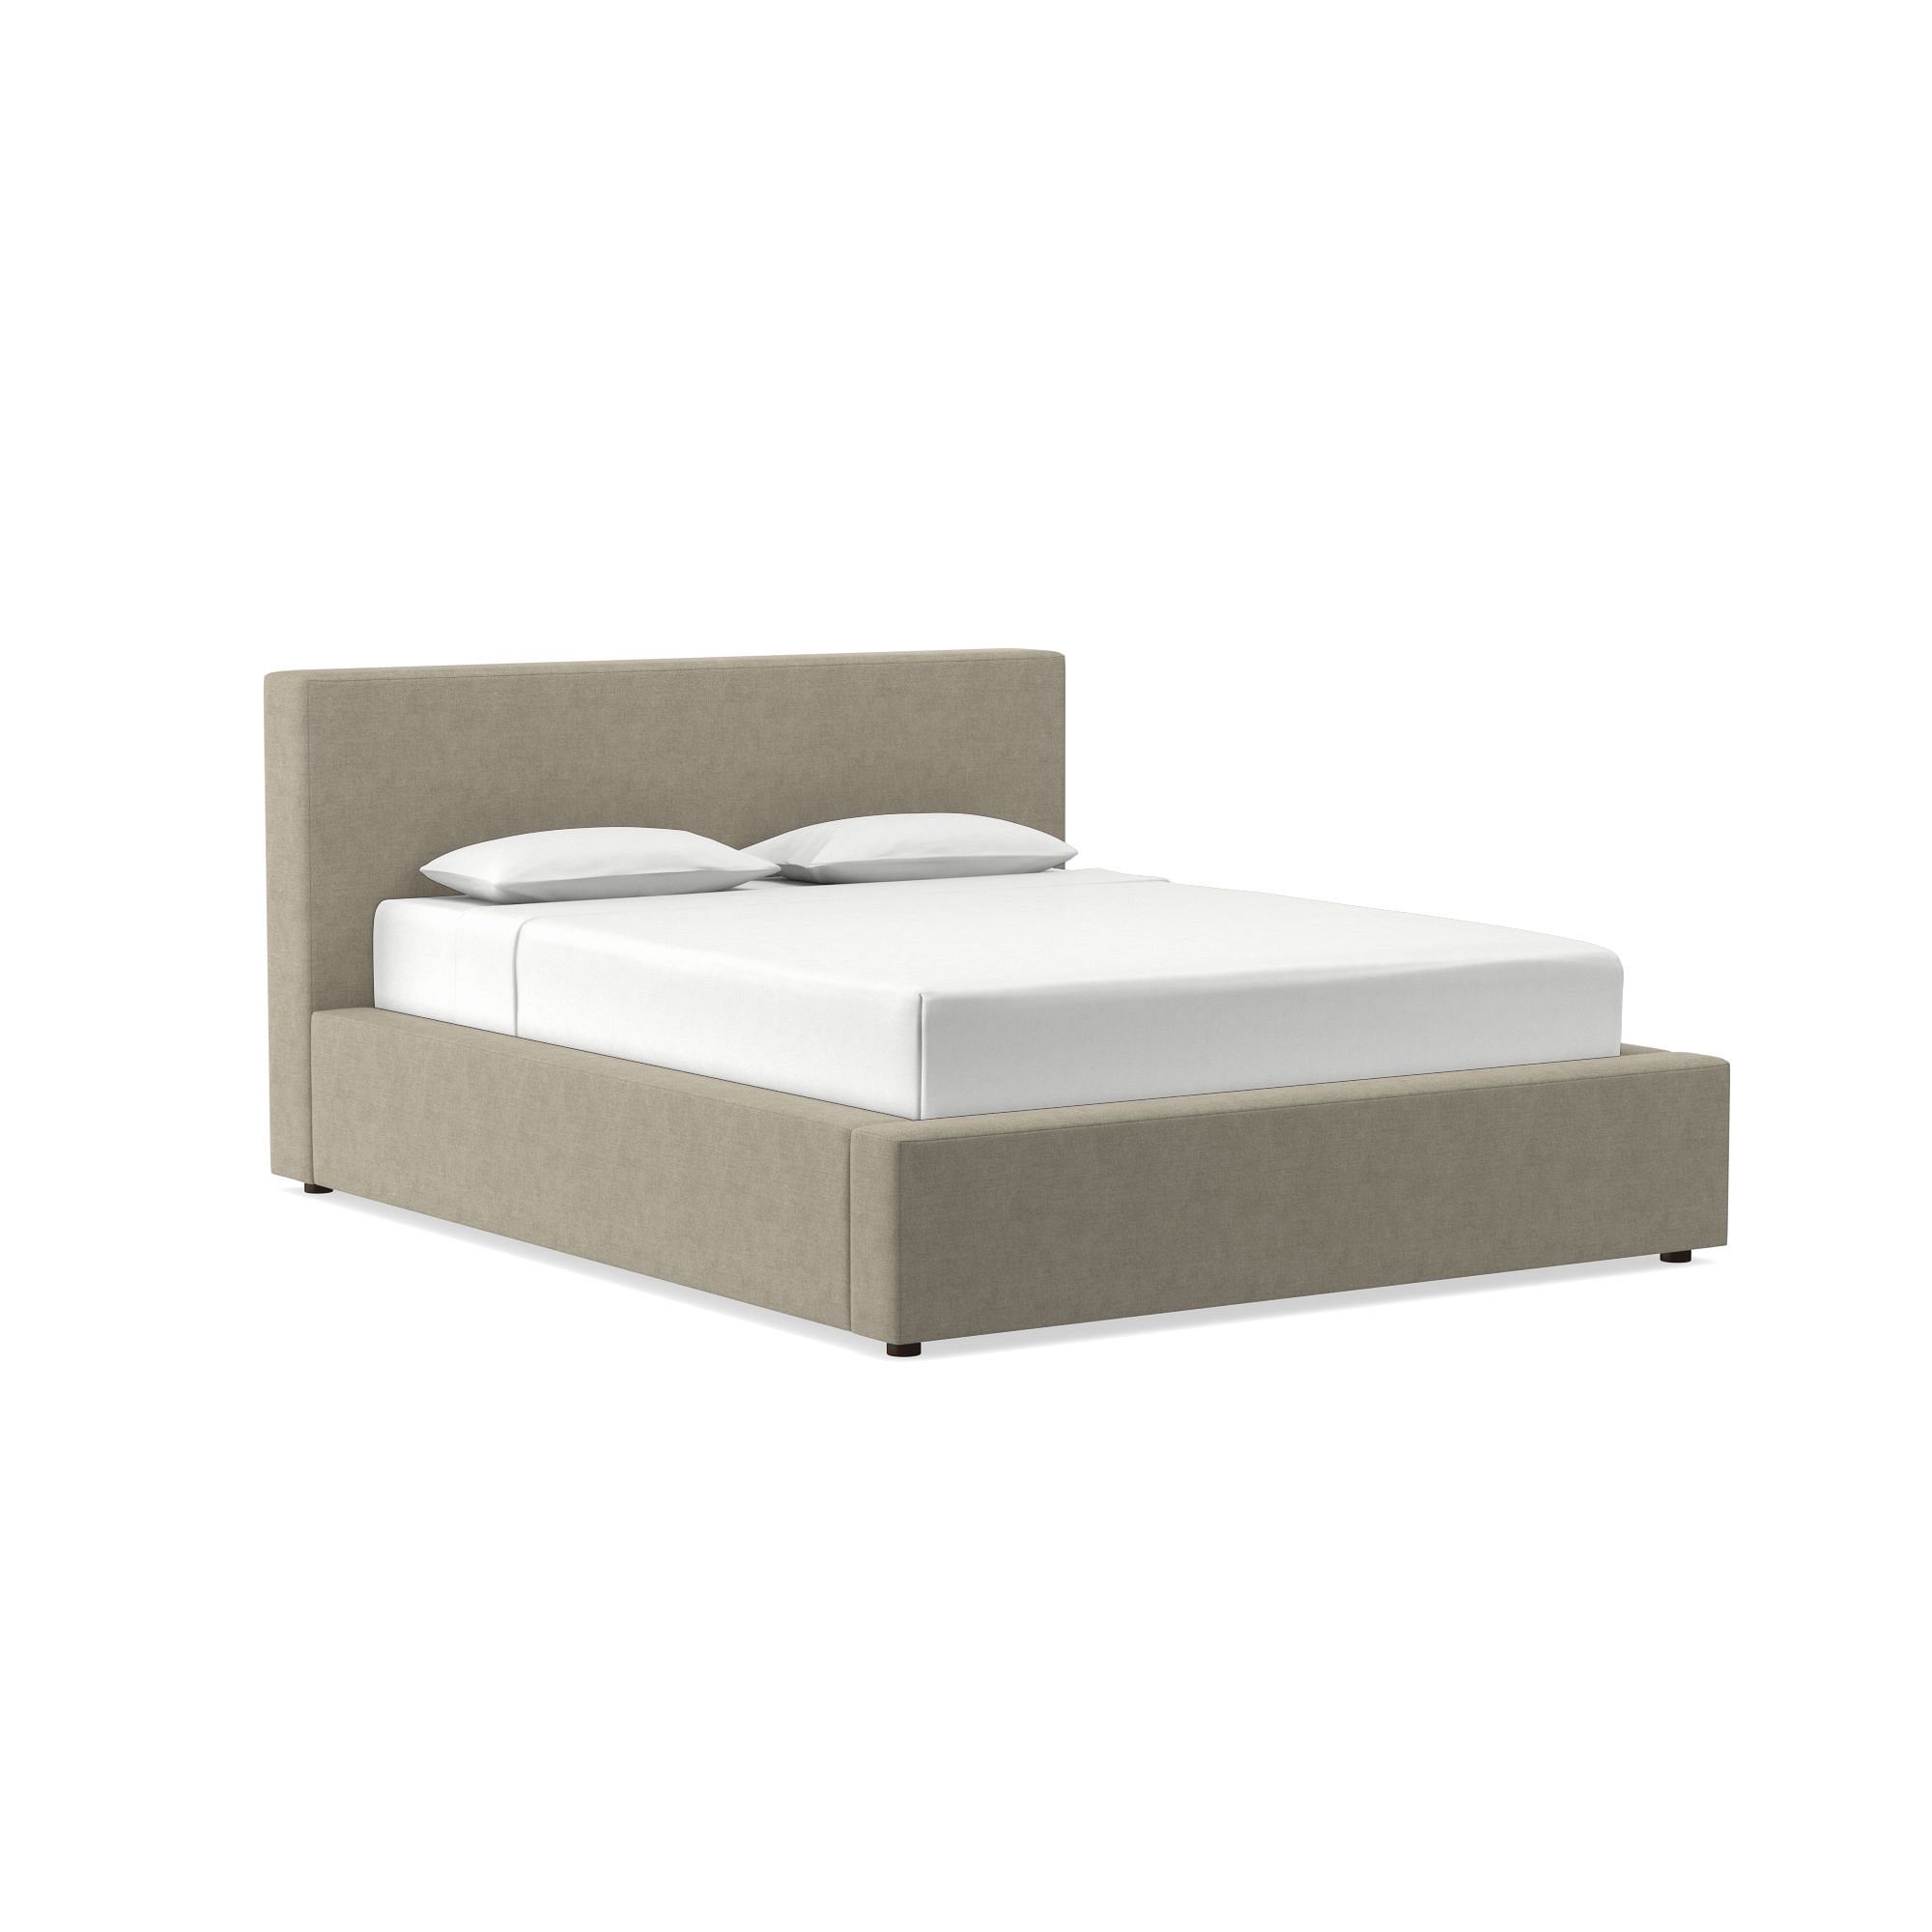 Harmony Upholstered Bed | West Elm